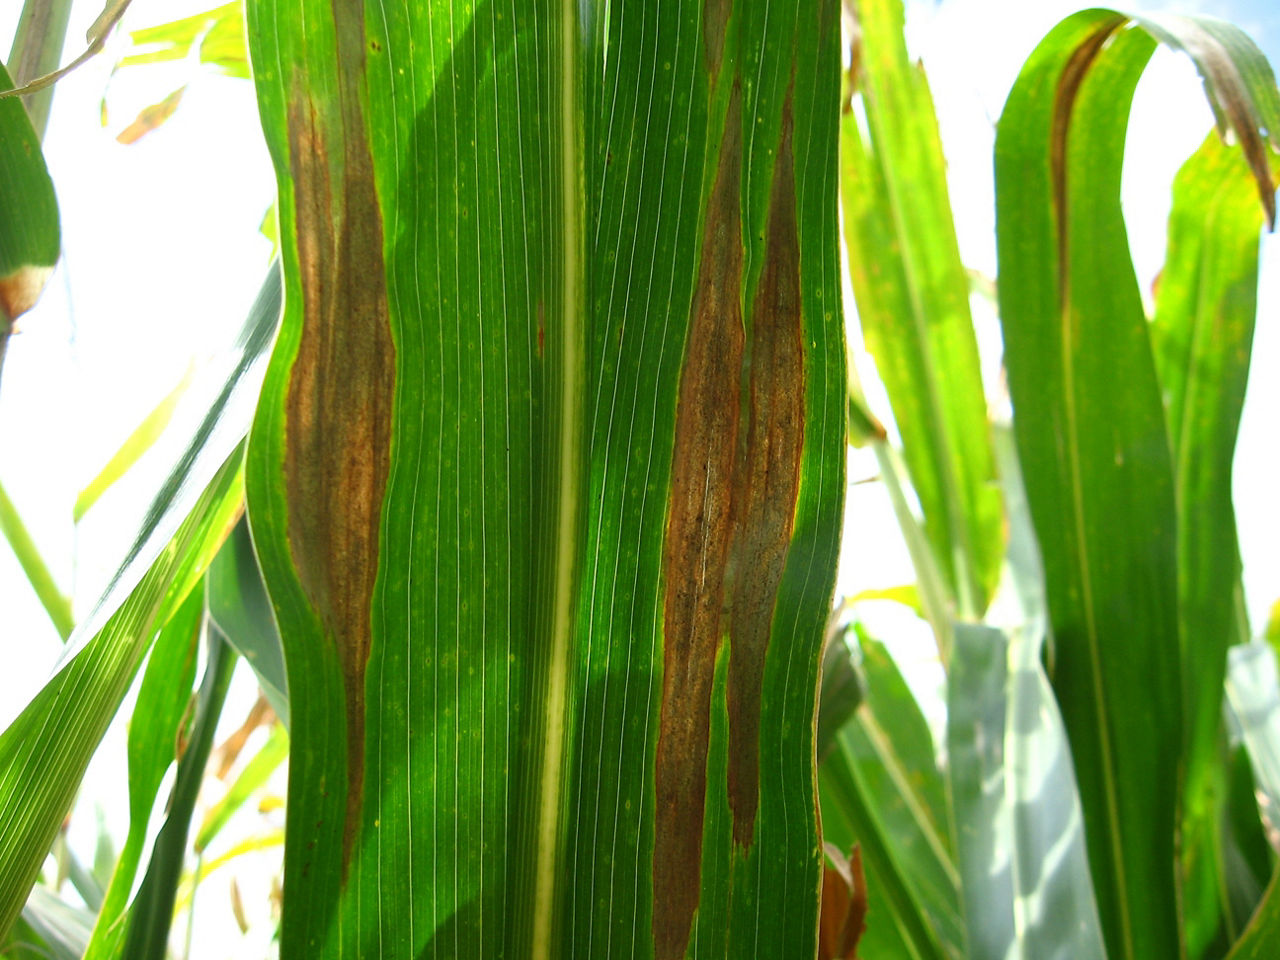 Figure 1. Elliptical or cigar-shaped lesions typical of northern corn leaf blight.  